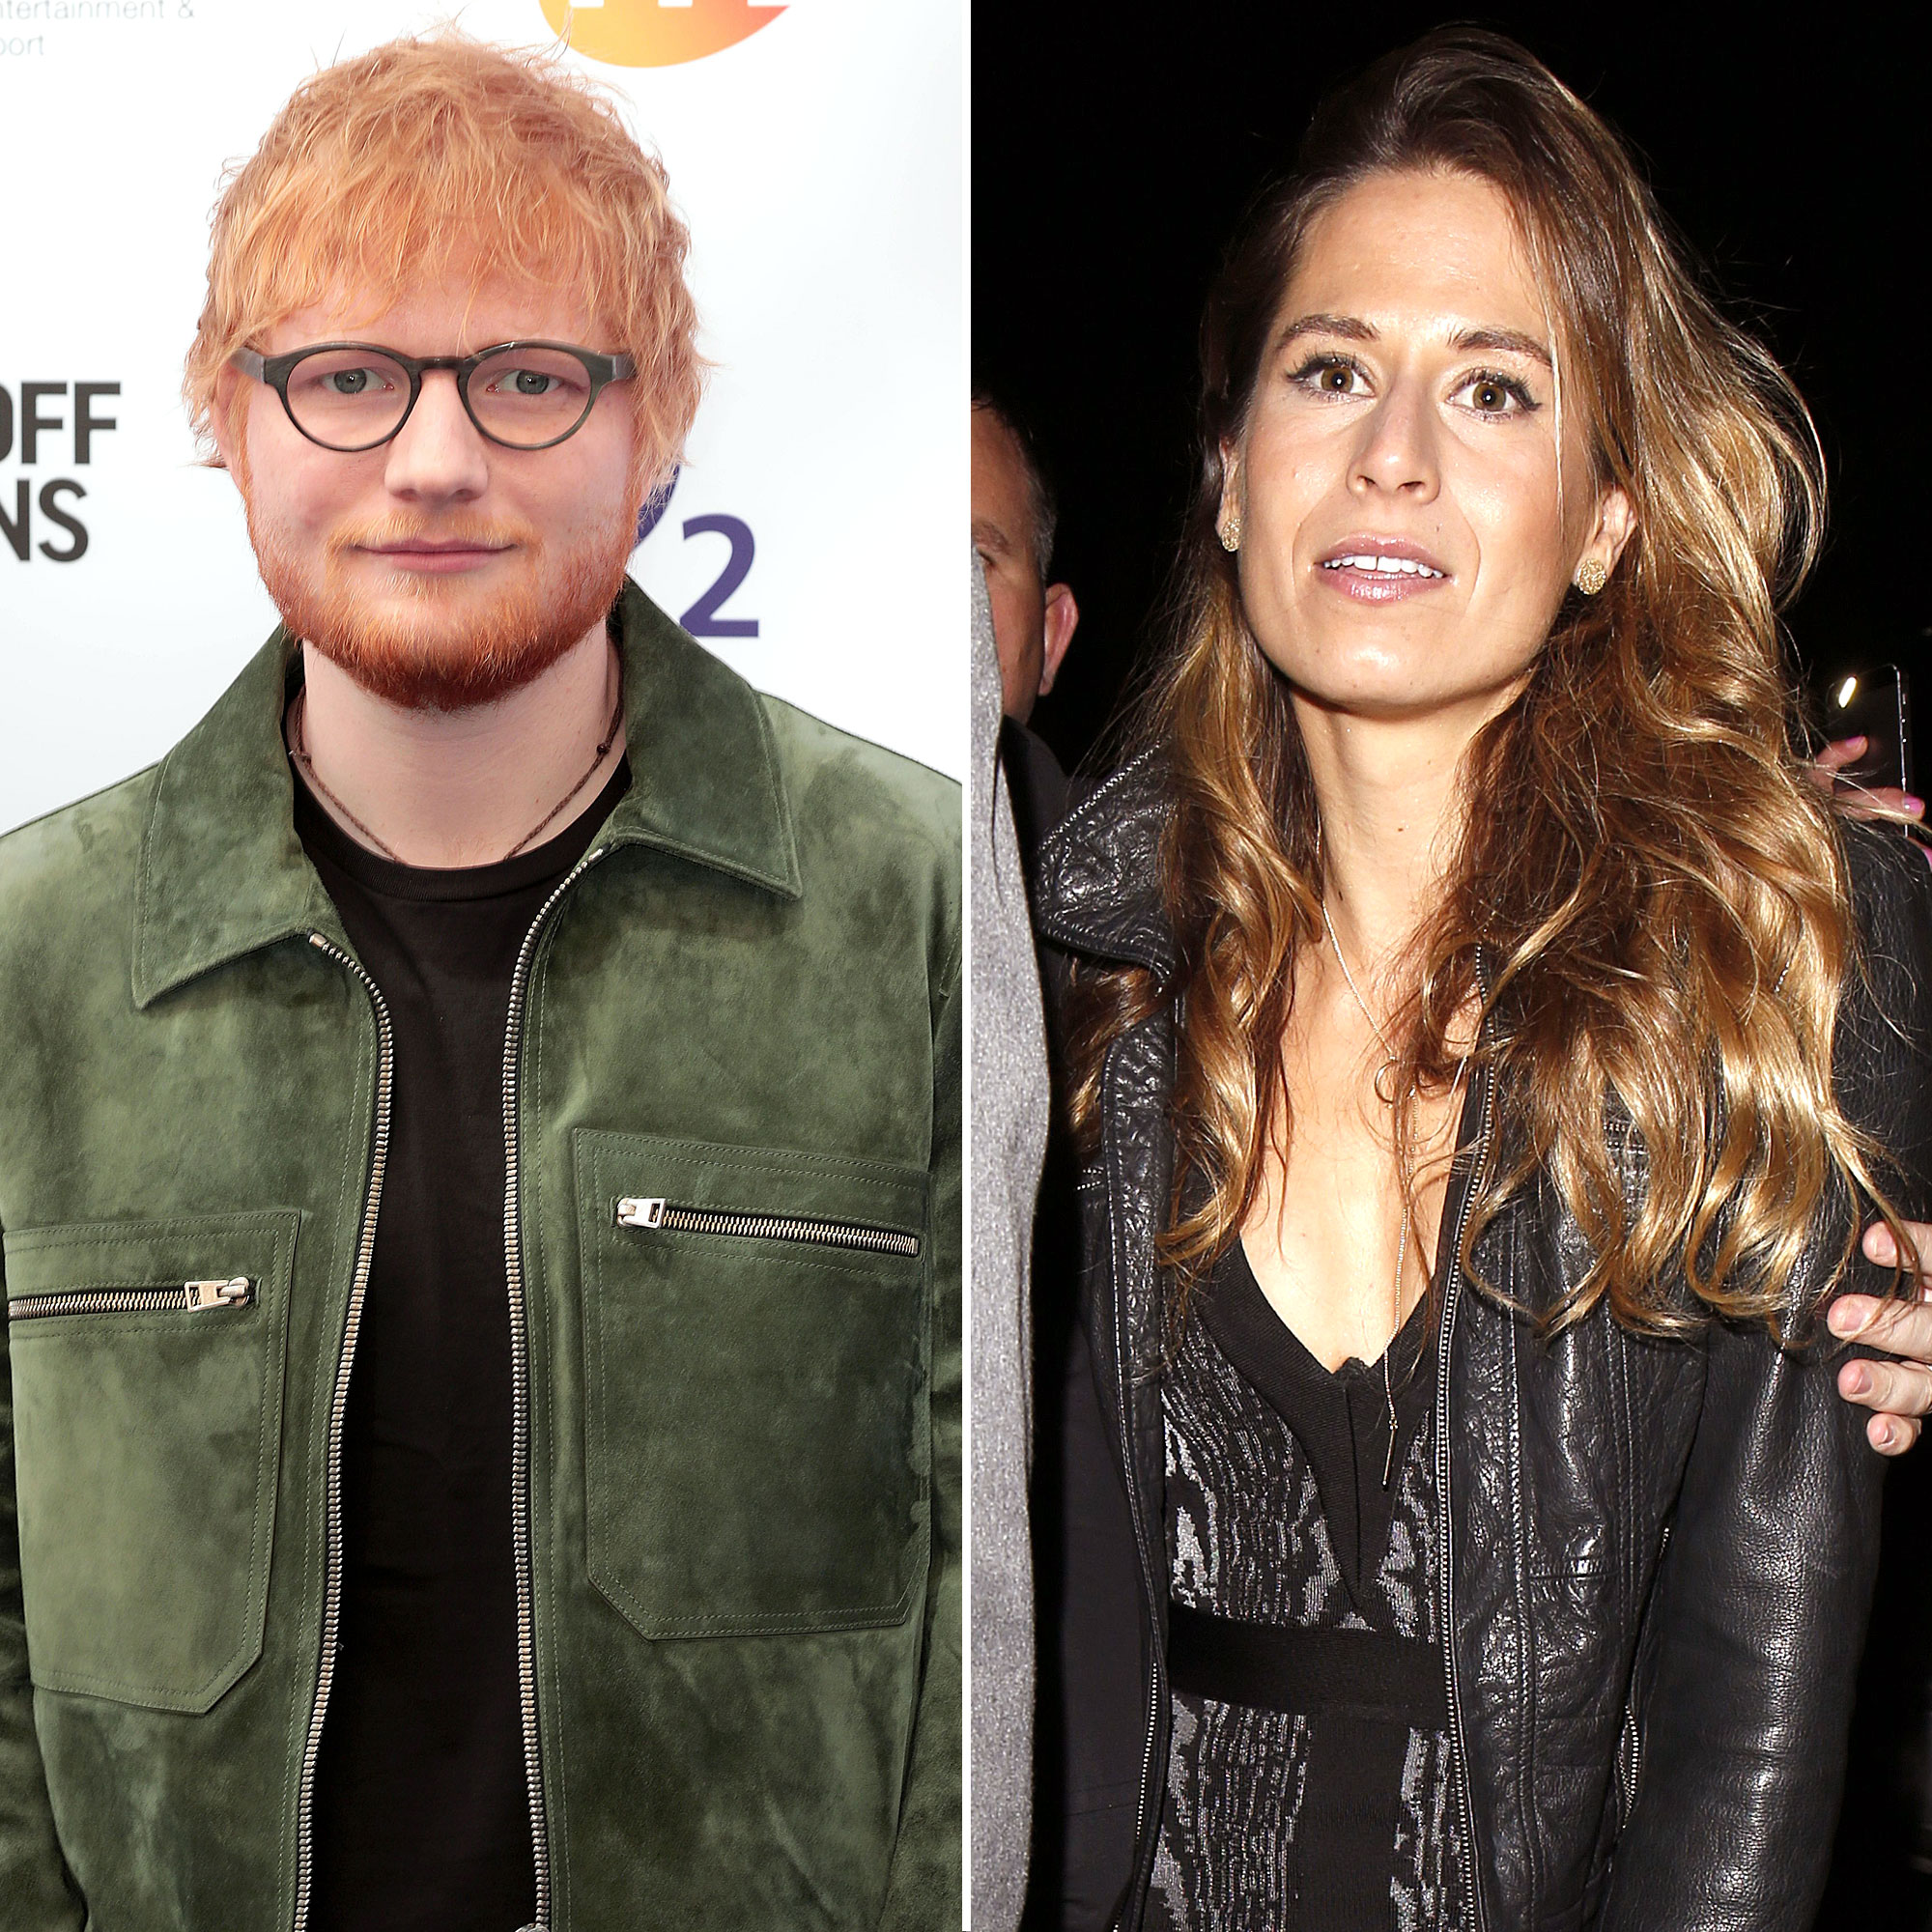 Ed Sheeran S Wife Cherry Seaborn Gives Birth To Their 1st Child